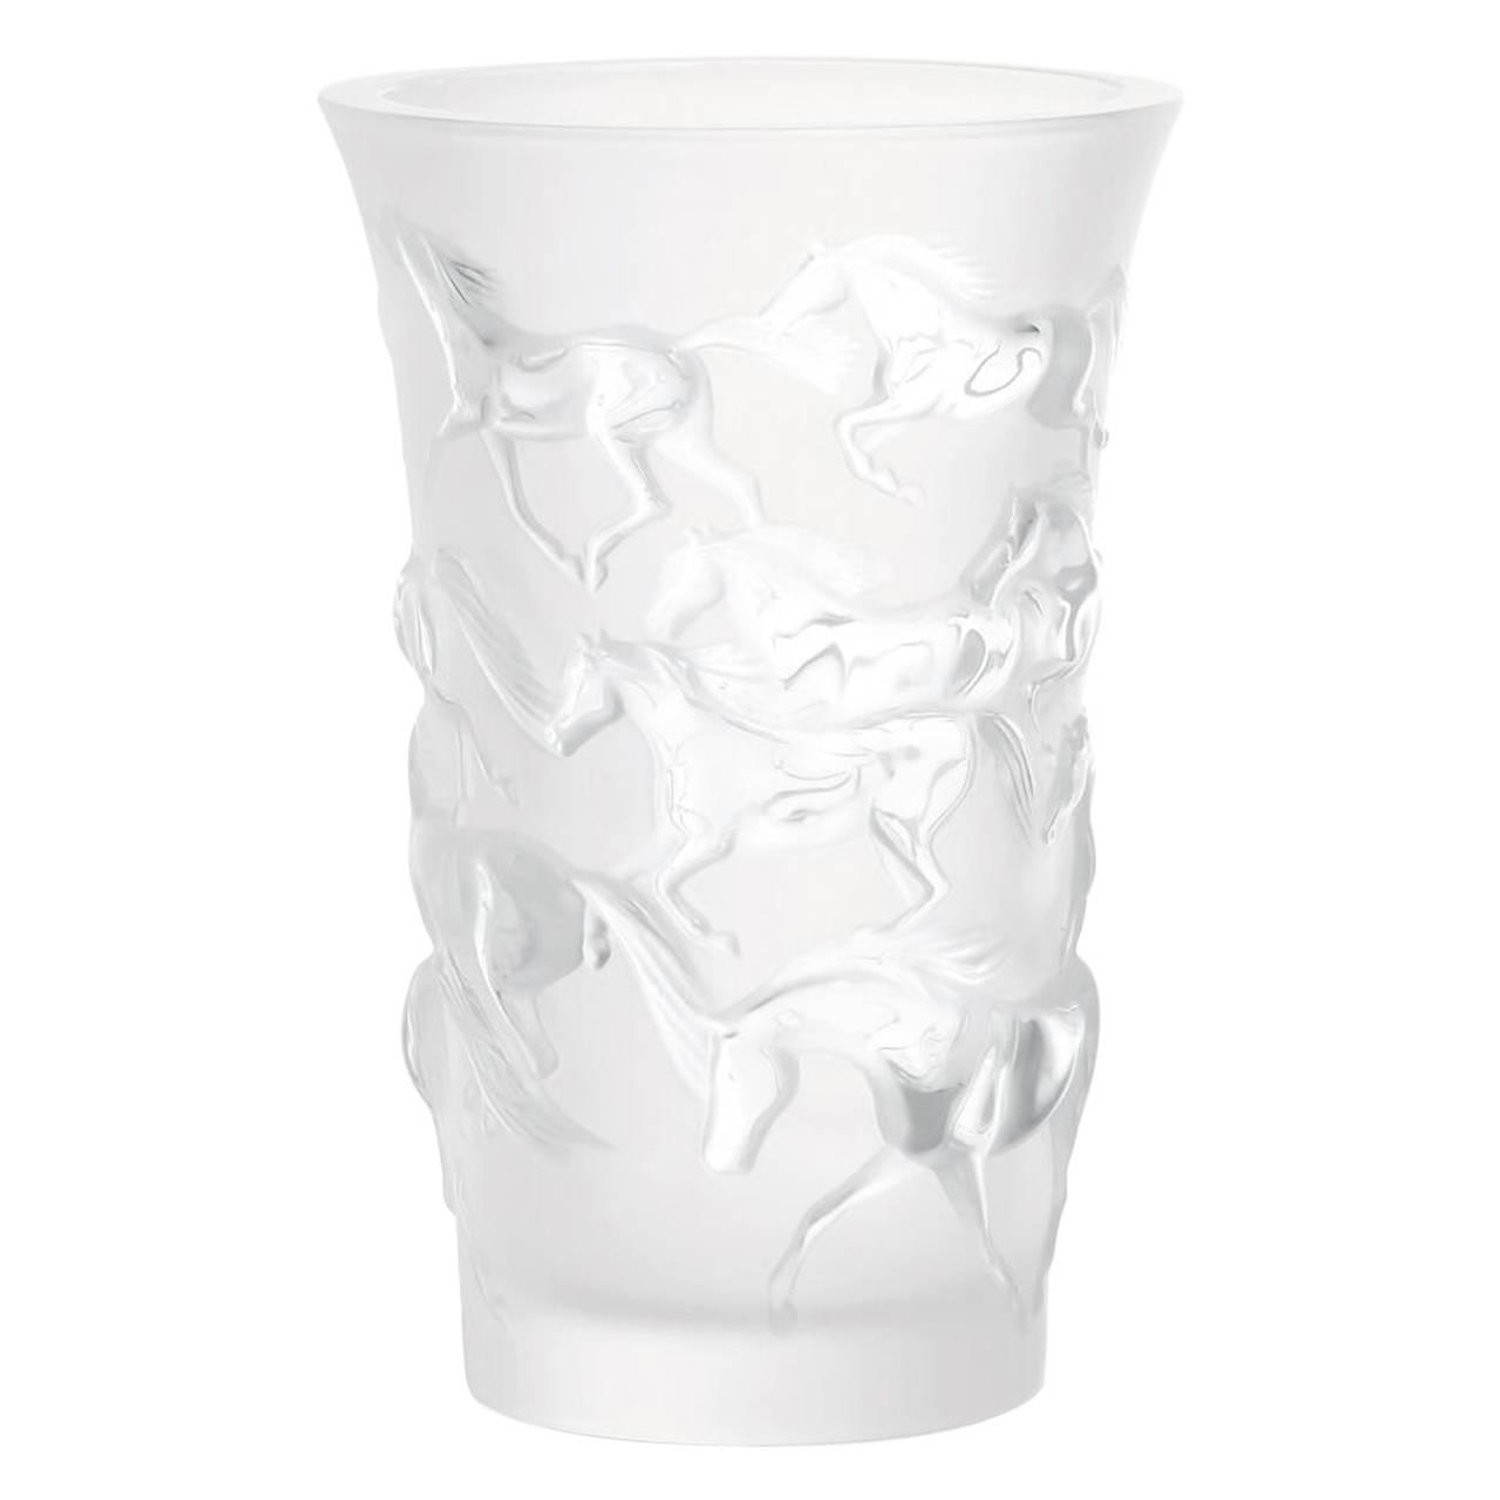 11 Amazing Lalique Bacchantes Extra Large Vase 2024 free download lalique bacchantes extra large vase of lalique elisabeth satin and clear crystal vase portraying birds in in lalique elisabeth satin and clear crystal vase portraying birds in branches at 1s